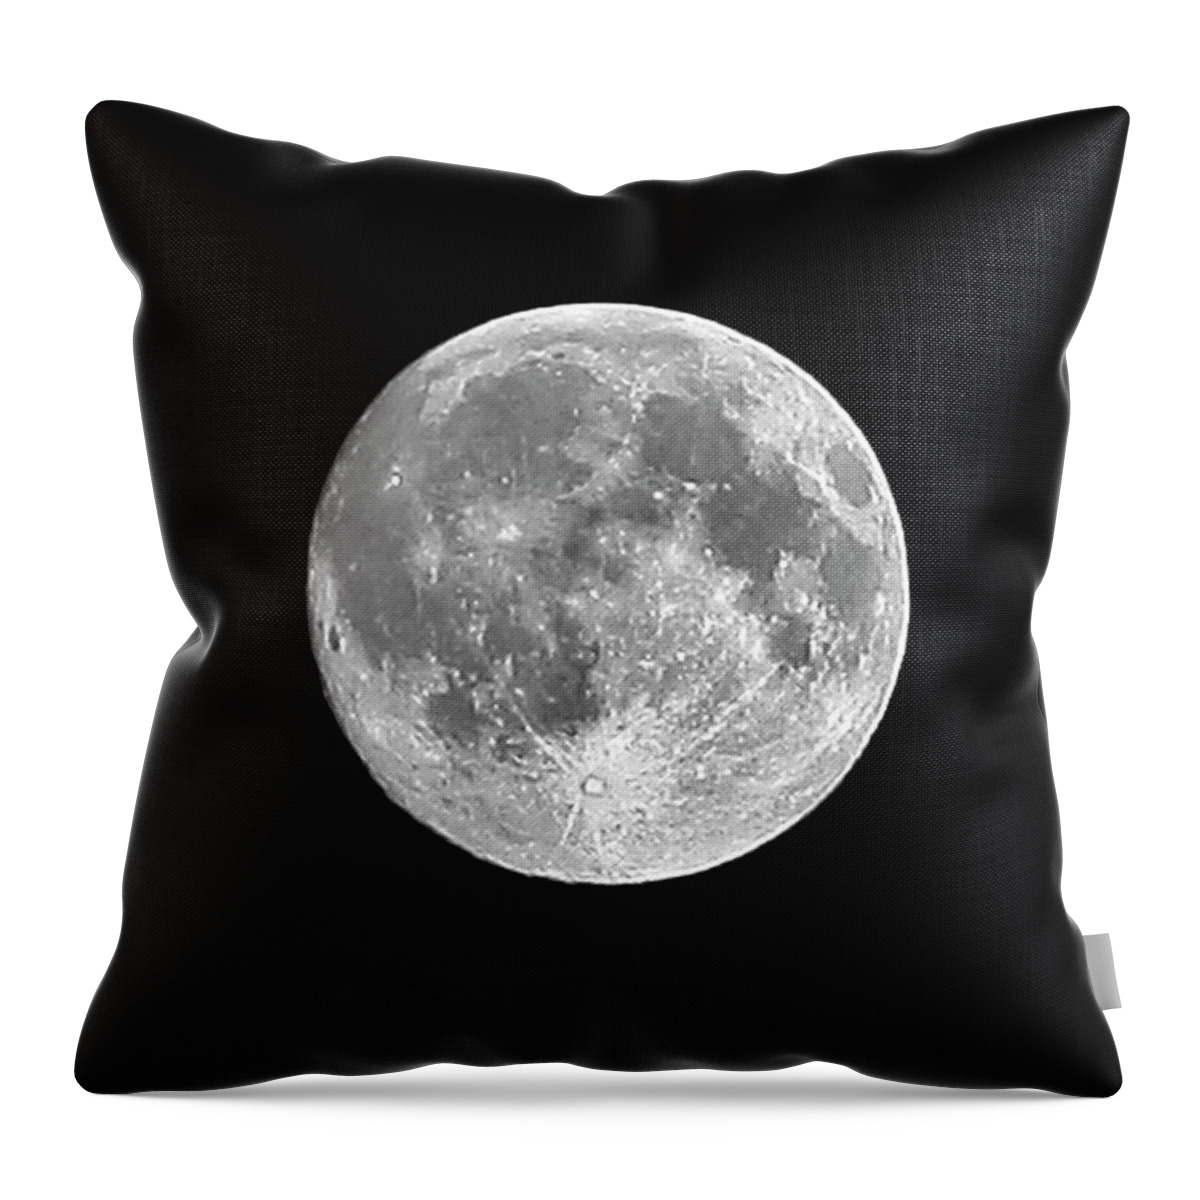 Outdoors Throw Pillow featuring the photograph Full Moon by Richard Newstead